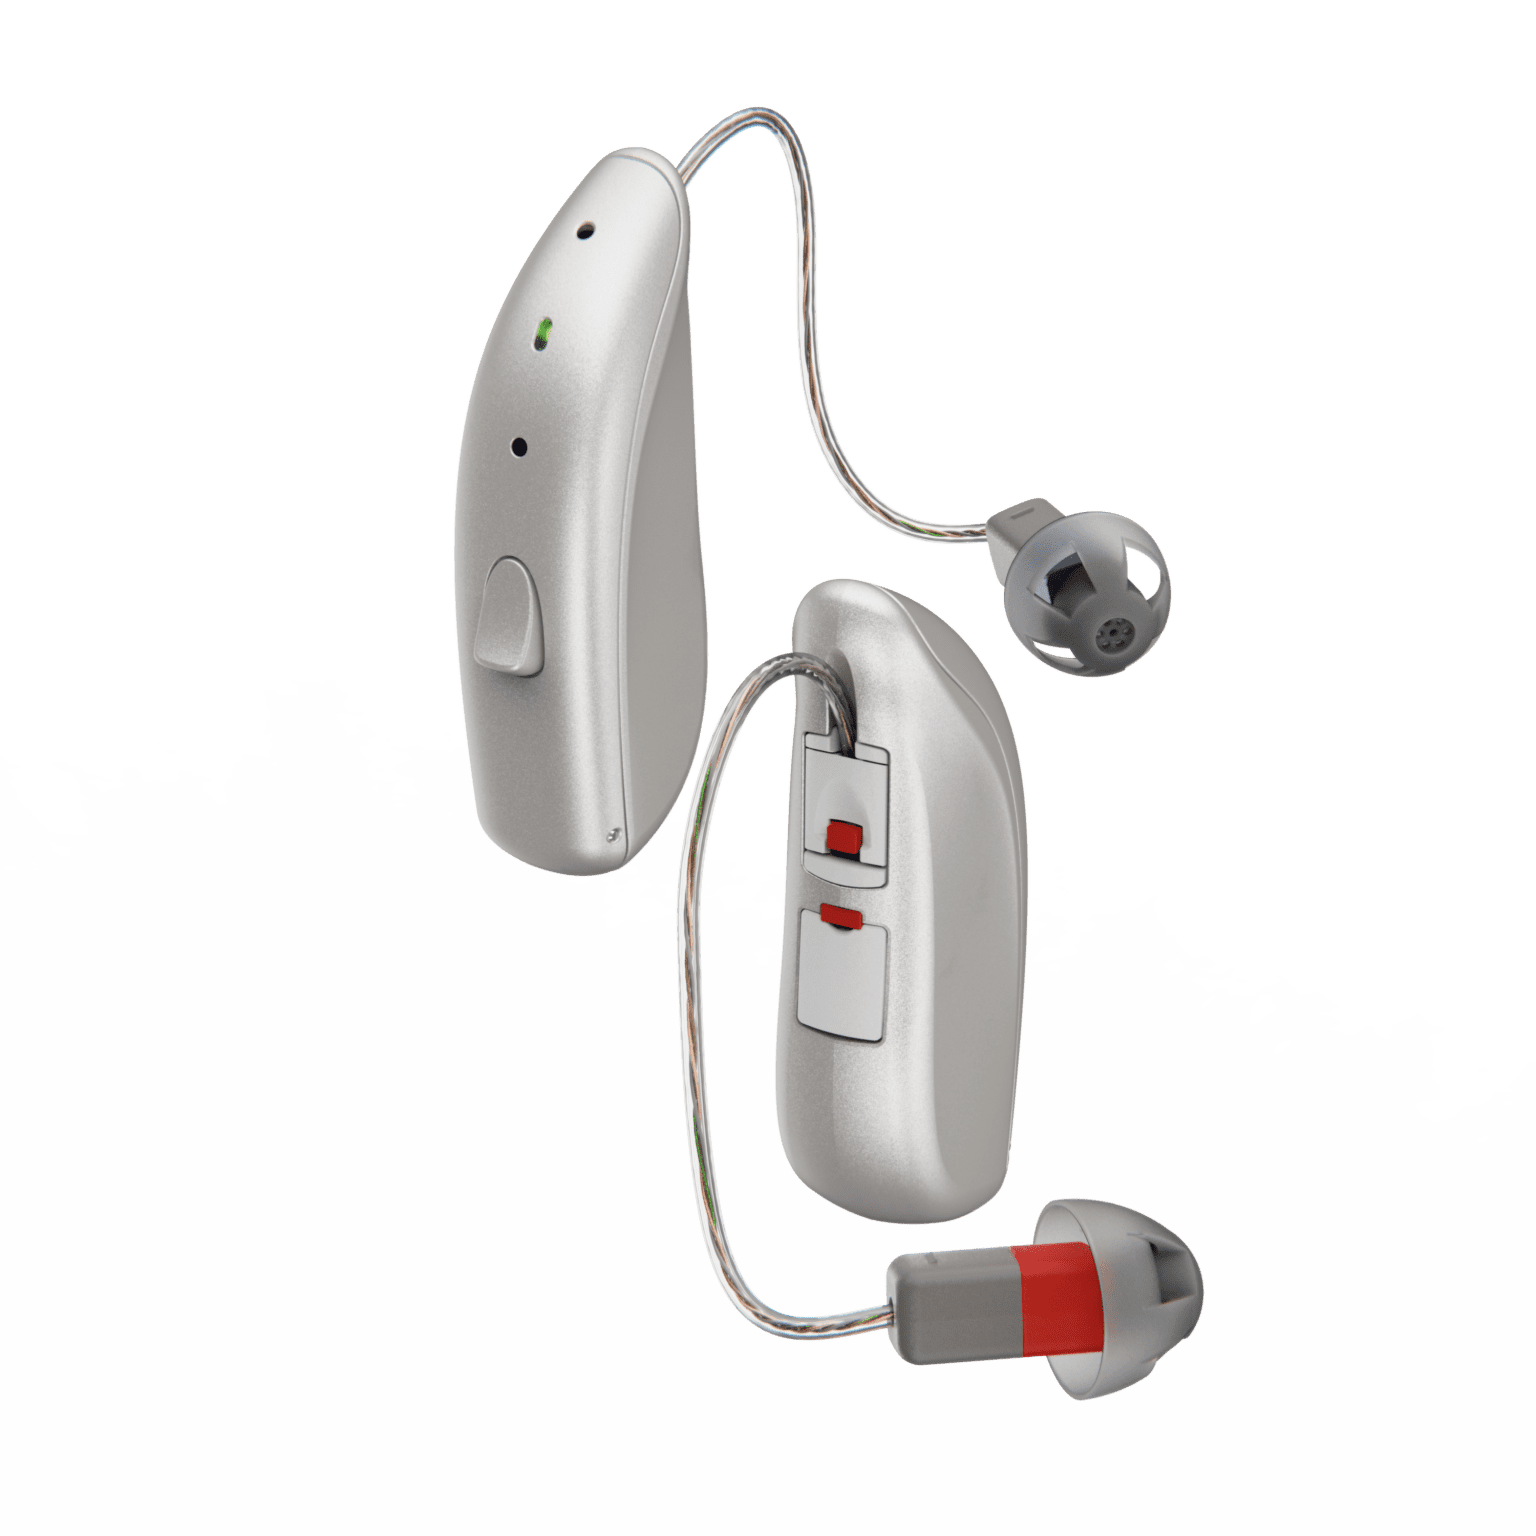 Lively 2 Pro Hearing Aids 1536x1536 